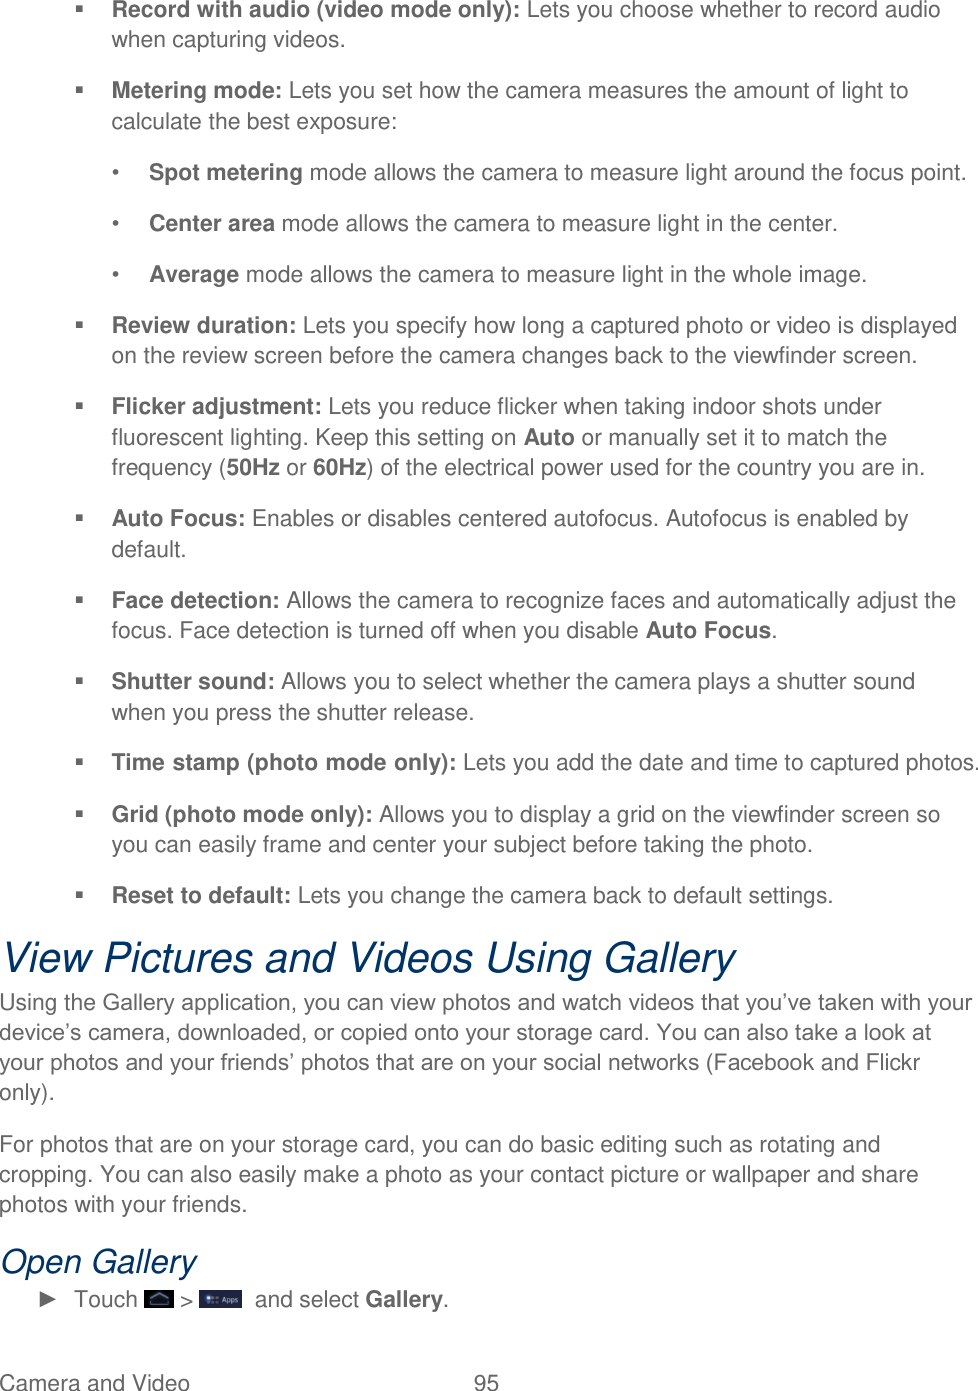 Camera and Video  95    Record with audio (video mode only): Lets you choose whether to record audio when capturing videos.  Metering mode: Lets you set how the camera measures the amount of light to calculate the best exposure: • Spot metering mode allows the camera to measure light around the focus point. • Center area mode allows the camera to measure light in the center. • Average mode allows the camera to measure light in the whole image.  Review duration: Lets you specify how long a captured photo or video is displayed on the review screen before the camera changes back to the viewfinder screen.  Flicker adjustment: Lets you reduce flicker when taking indoor shots under fluorescent lighting. Keep this setting on Auto or manually set it to match the frequency (50Hz or 60Hz) of the electrical power used for the country you are in.  Auto Focus: Enables or disables centered autofocus. Autofocus is enabled by default.   Face detection: Allows the camera to recognize faces and automatically adjust the focus. Face detection is turned off when you disable Auto Focus.  Shutter sound: Allows you to select whether the camera plays a shutter sound when you press the shutter release.  Time stamp (photo mode only): Lets you add the date and time to captured photos.  Grid (photo mode only): Allows you to display a grid on the viewfinder screen so you can easily frame and center your subject before taking the photo.  Reset to default: Lets you change the camera back to default settings. View Pictures and Videos Using Gallery Using the Gallery application, you can view photos and watch videos that you’ve taken with your device’s camera, downloaded, or copied onto your storage card. You can also take a look at your photos and your friends’ photos that are on your social networks (Facebook and Flickr only). For photos that are on your storage card, you can do basic editing such as rotating and cropping. You can also easily make a photo as your contact picture or wallpaper and share photos with your friends. Open Gallery ►  Touch   &gt;    and select Gallery. 